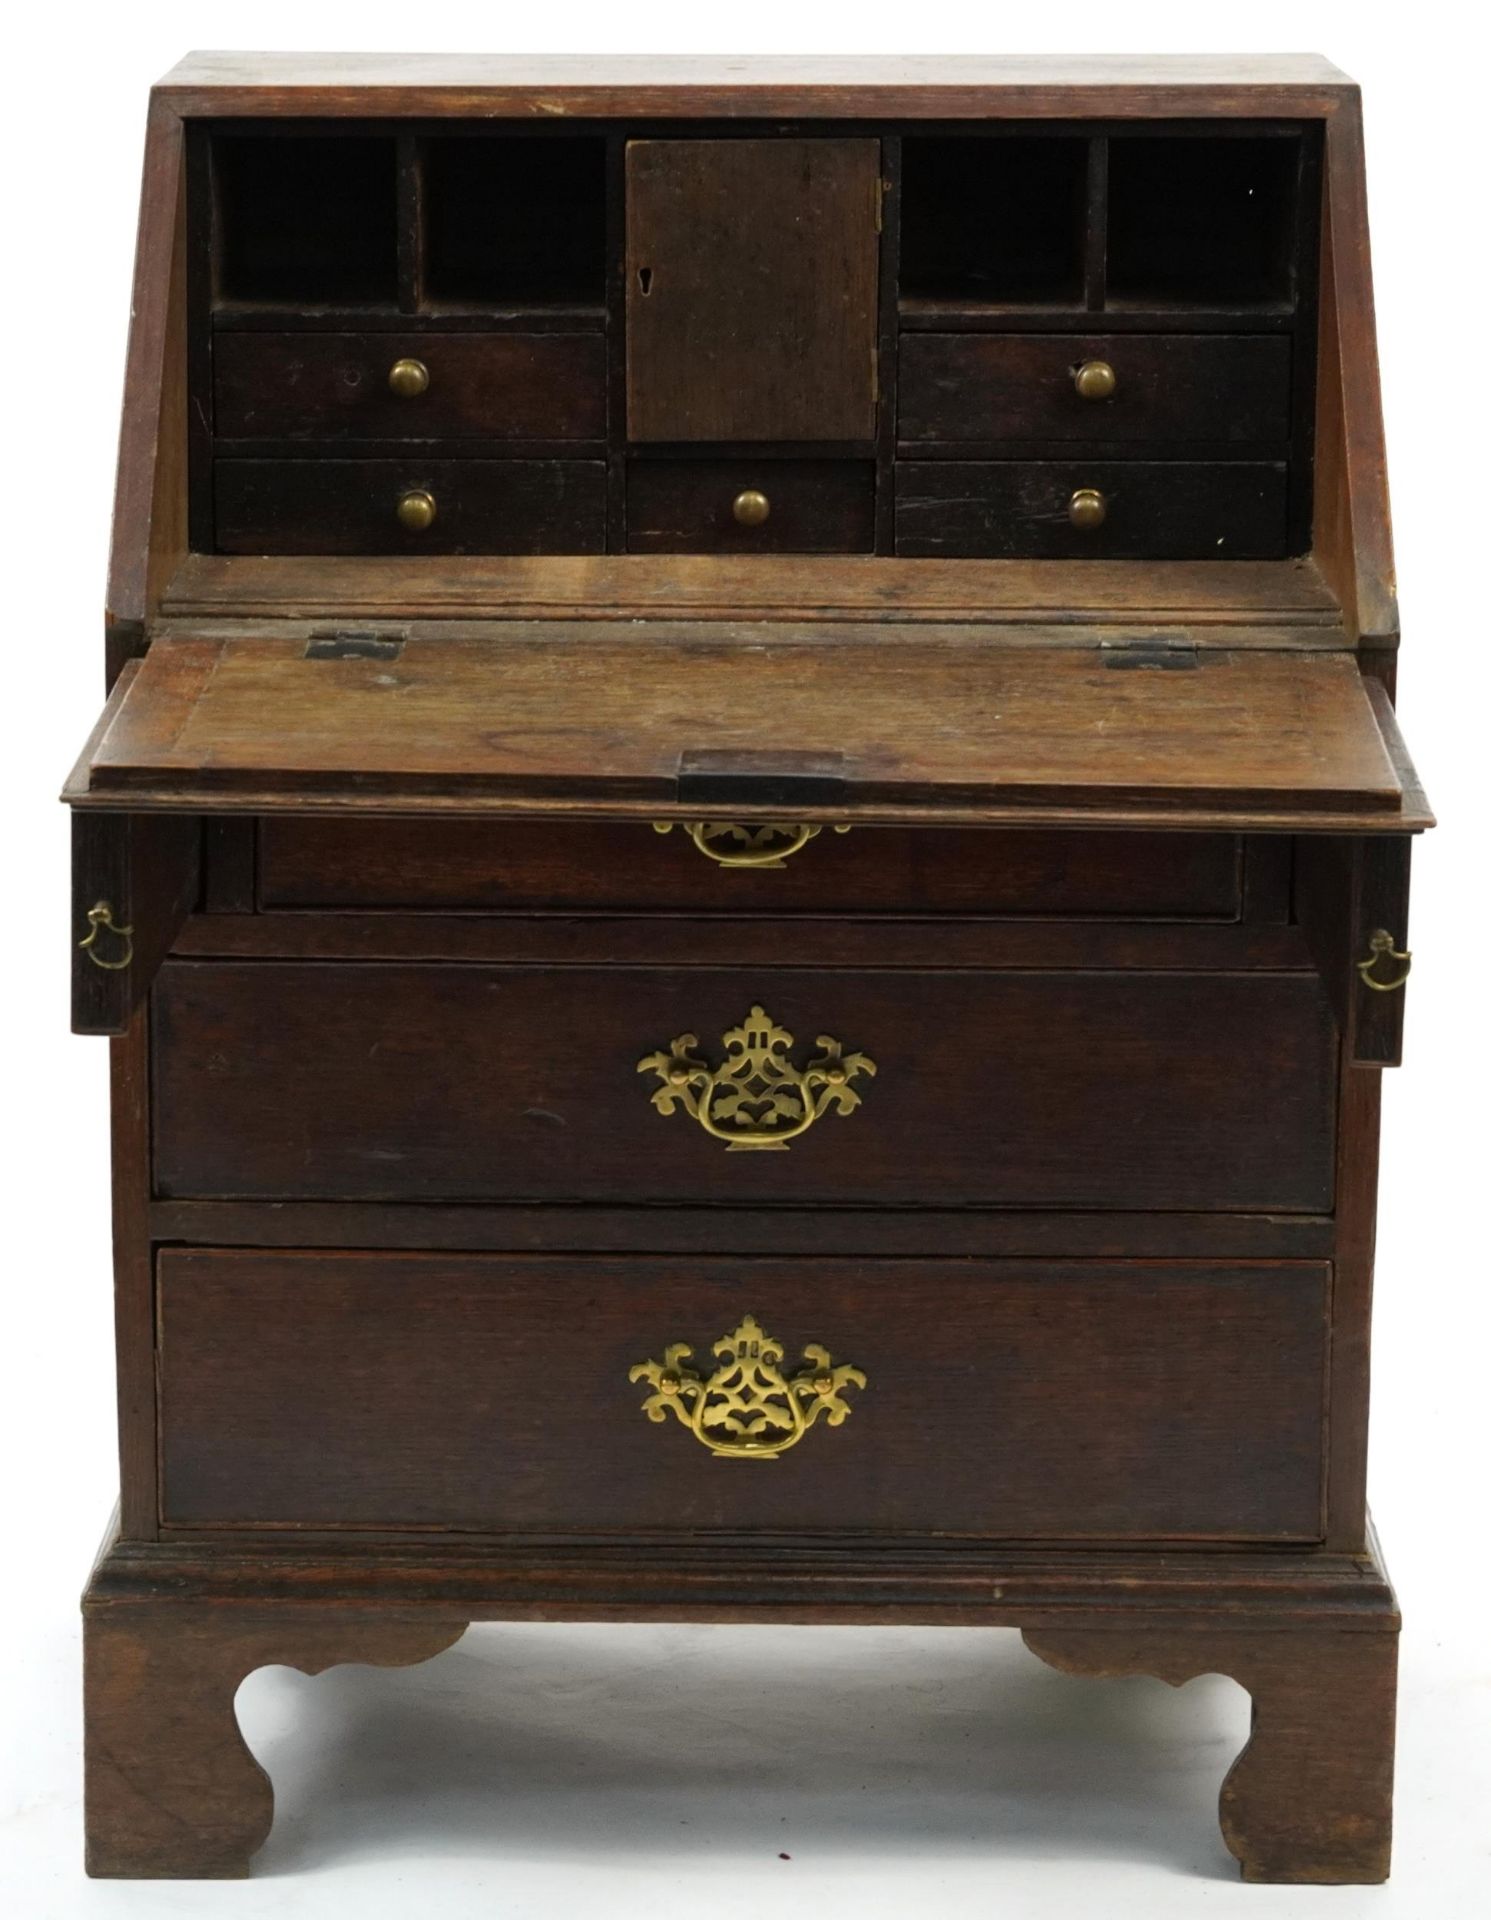 George III oak child's bureau with fitted interior and brass handles, 87cm H x 62cm W x 44cm D - Image 3 of 4